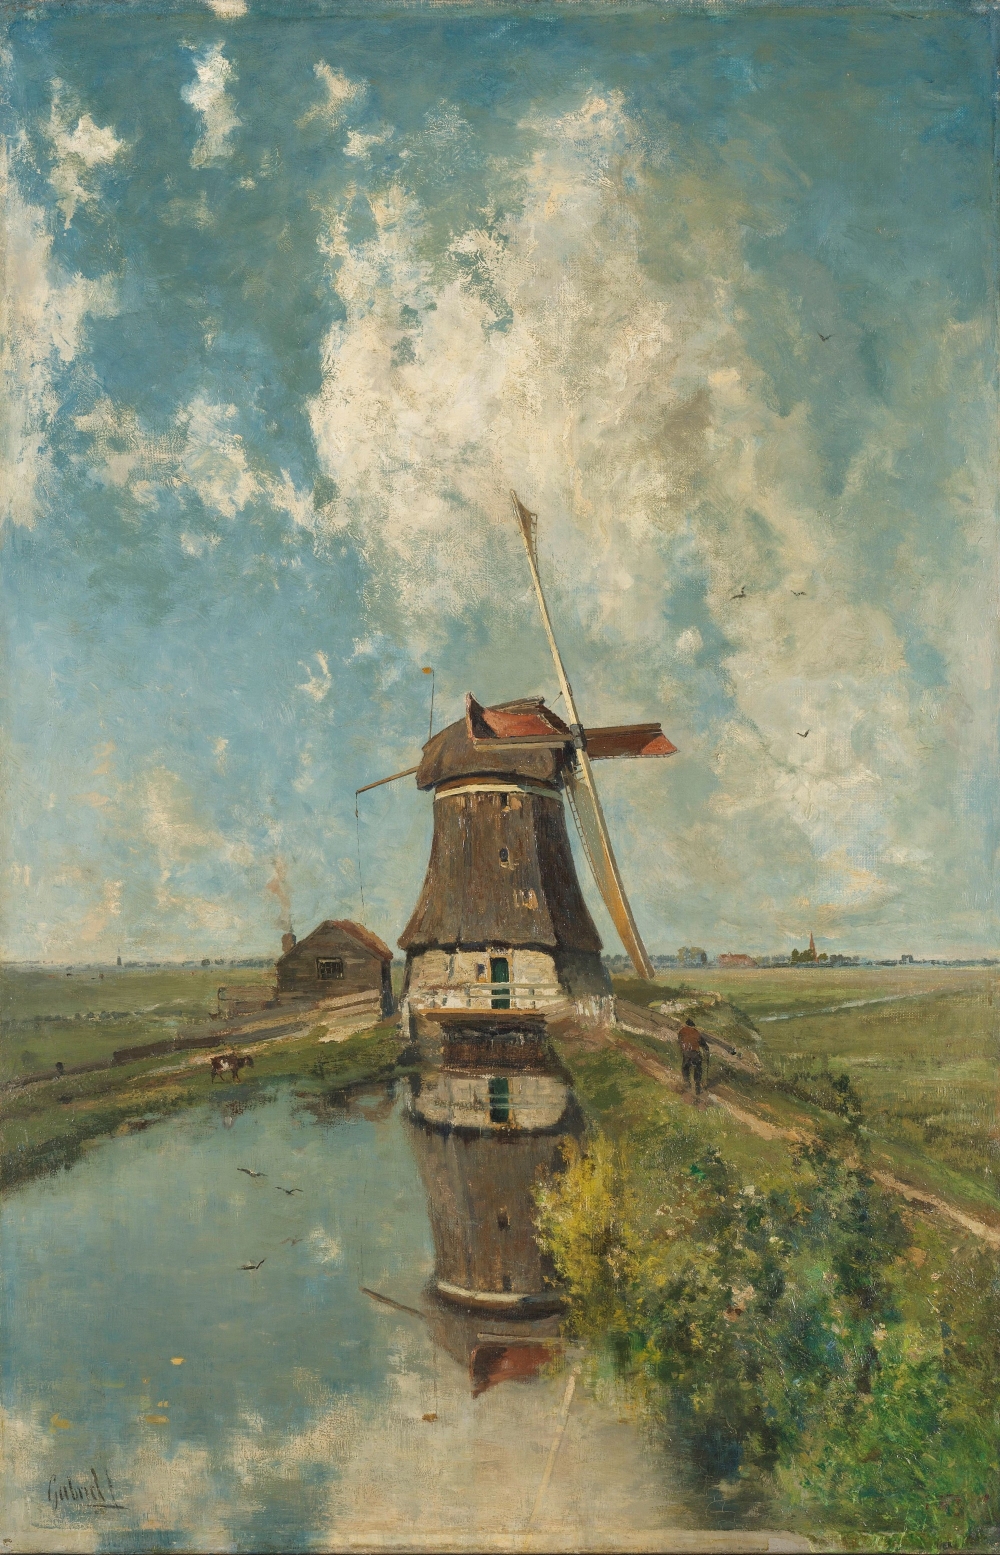 Mirror of Reality. Nineteenth century Painting in the Netherlands